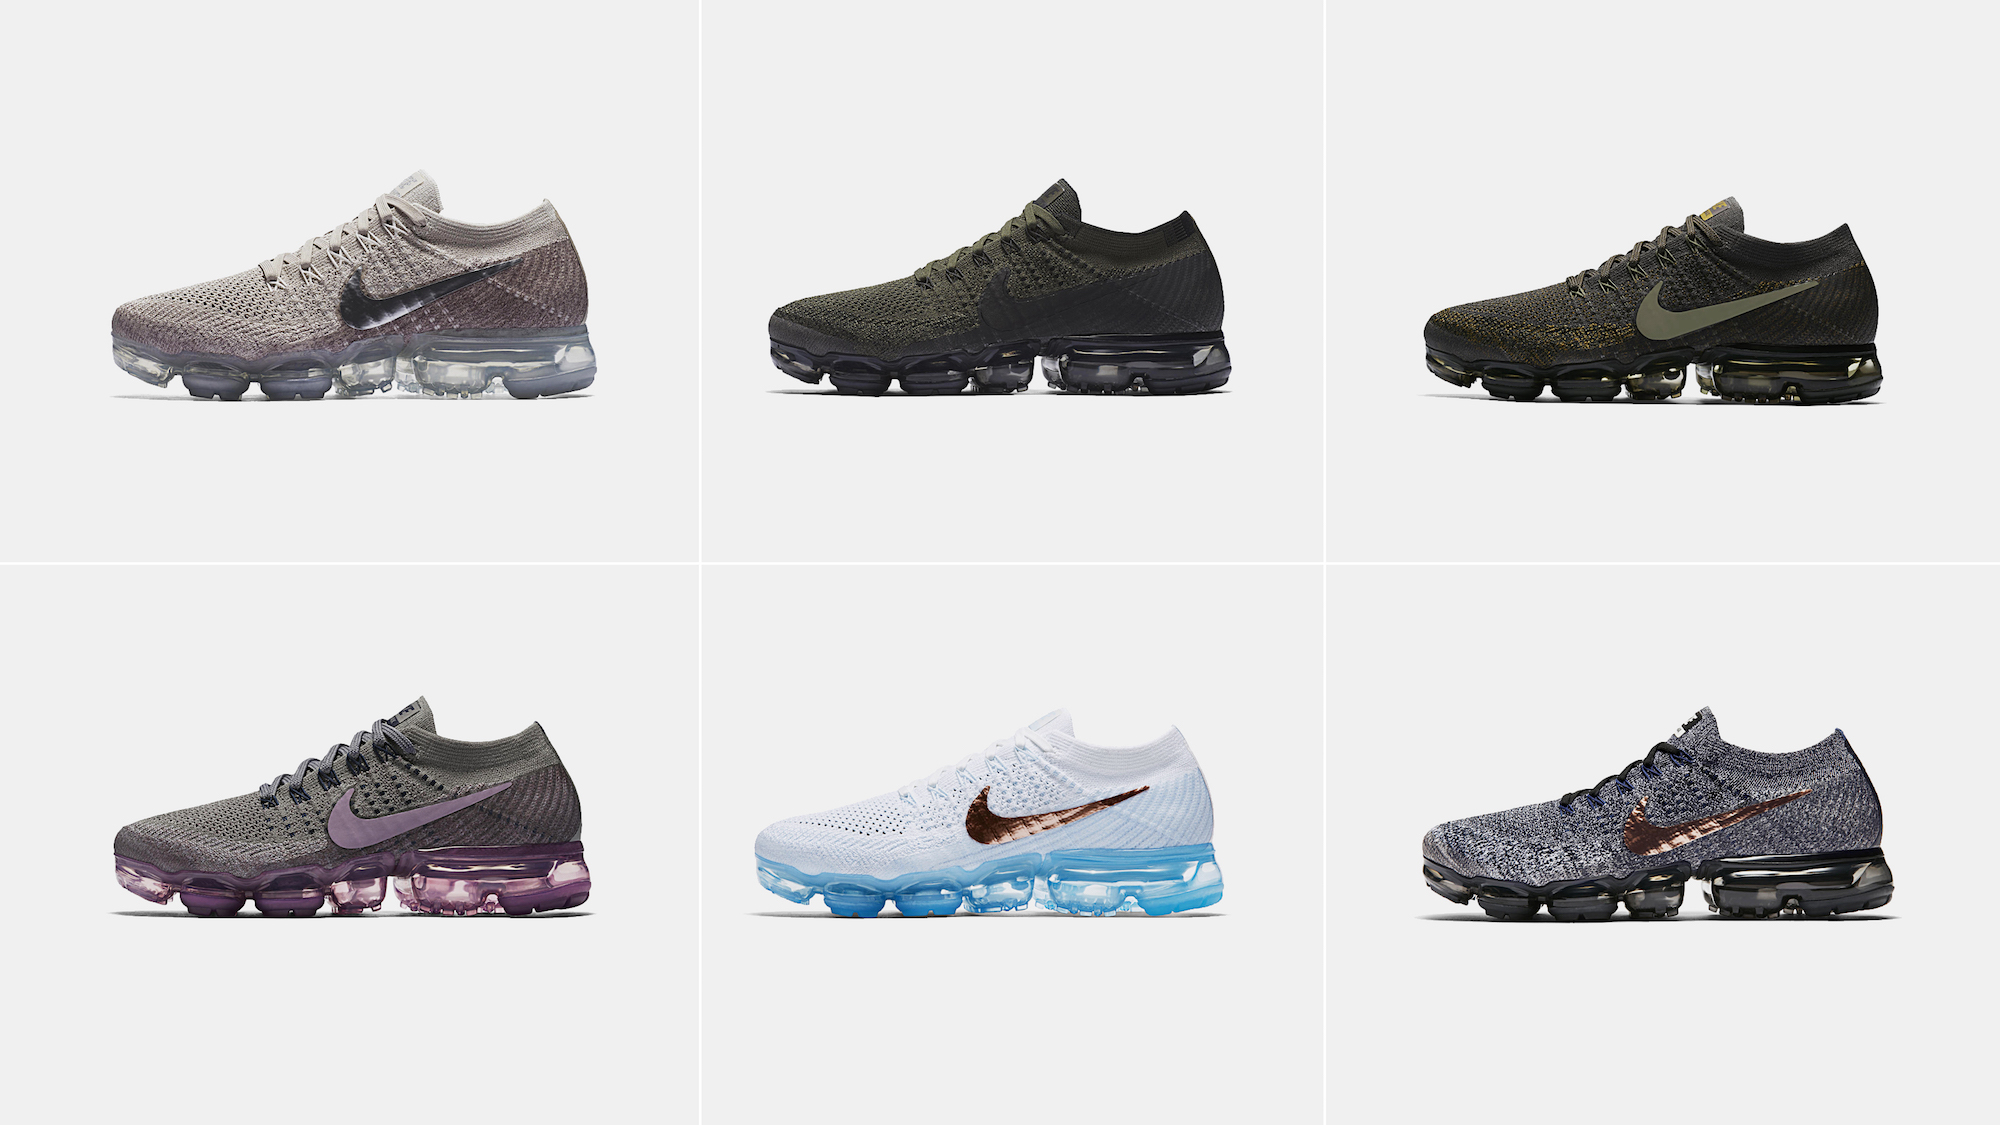 New Nike Air VaporMax Flyknit Colorways 